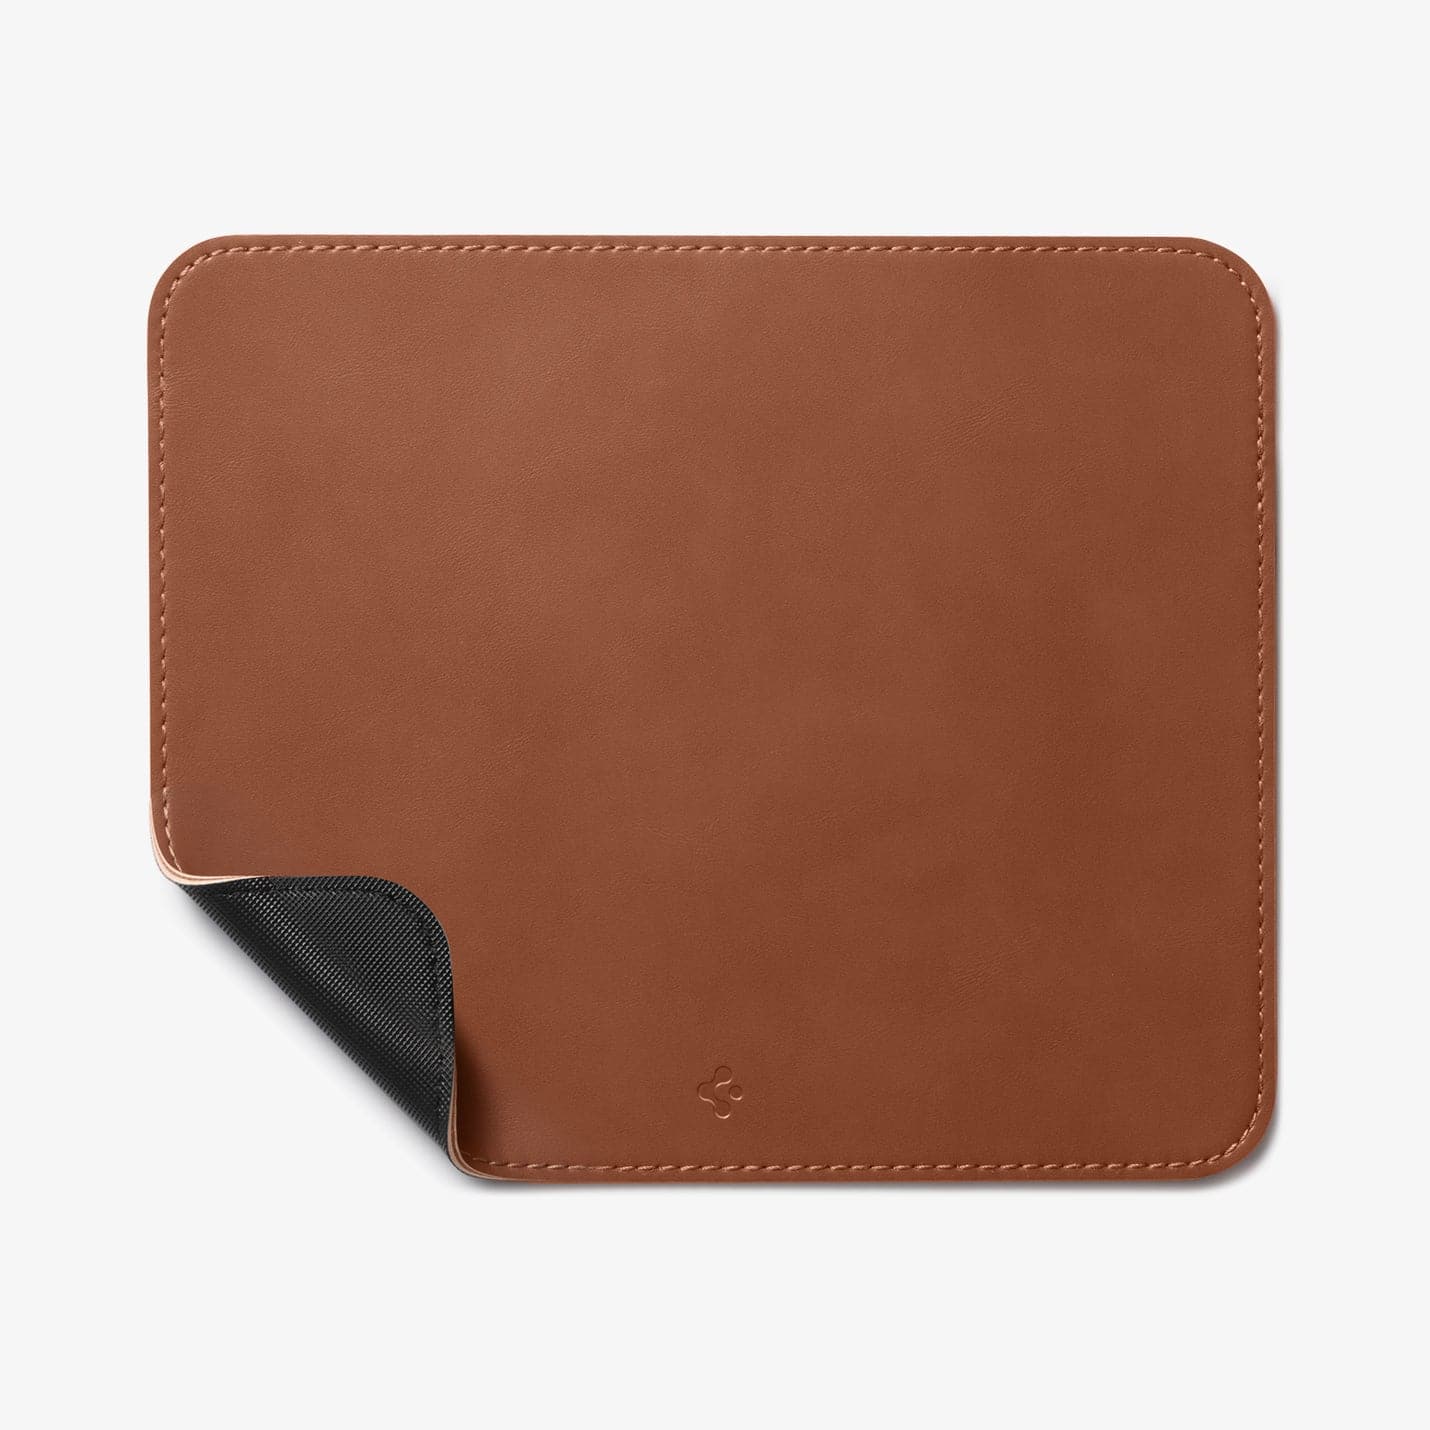 APP04761 - LD301 Mousepad in brown showing the front with bottom left bending slightly